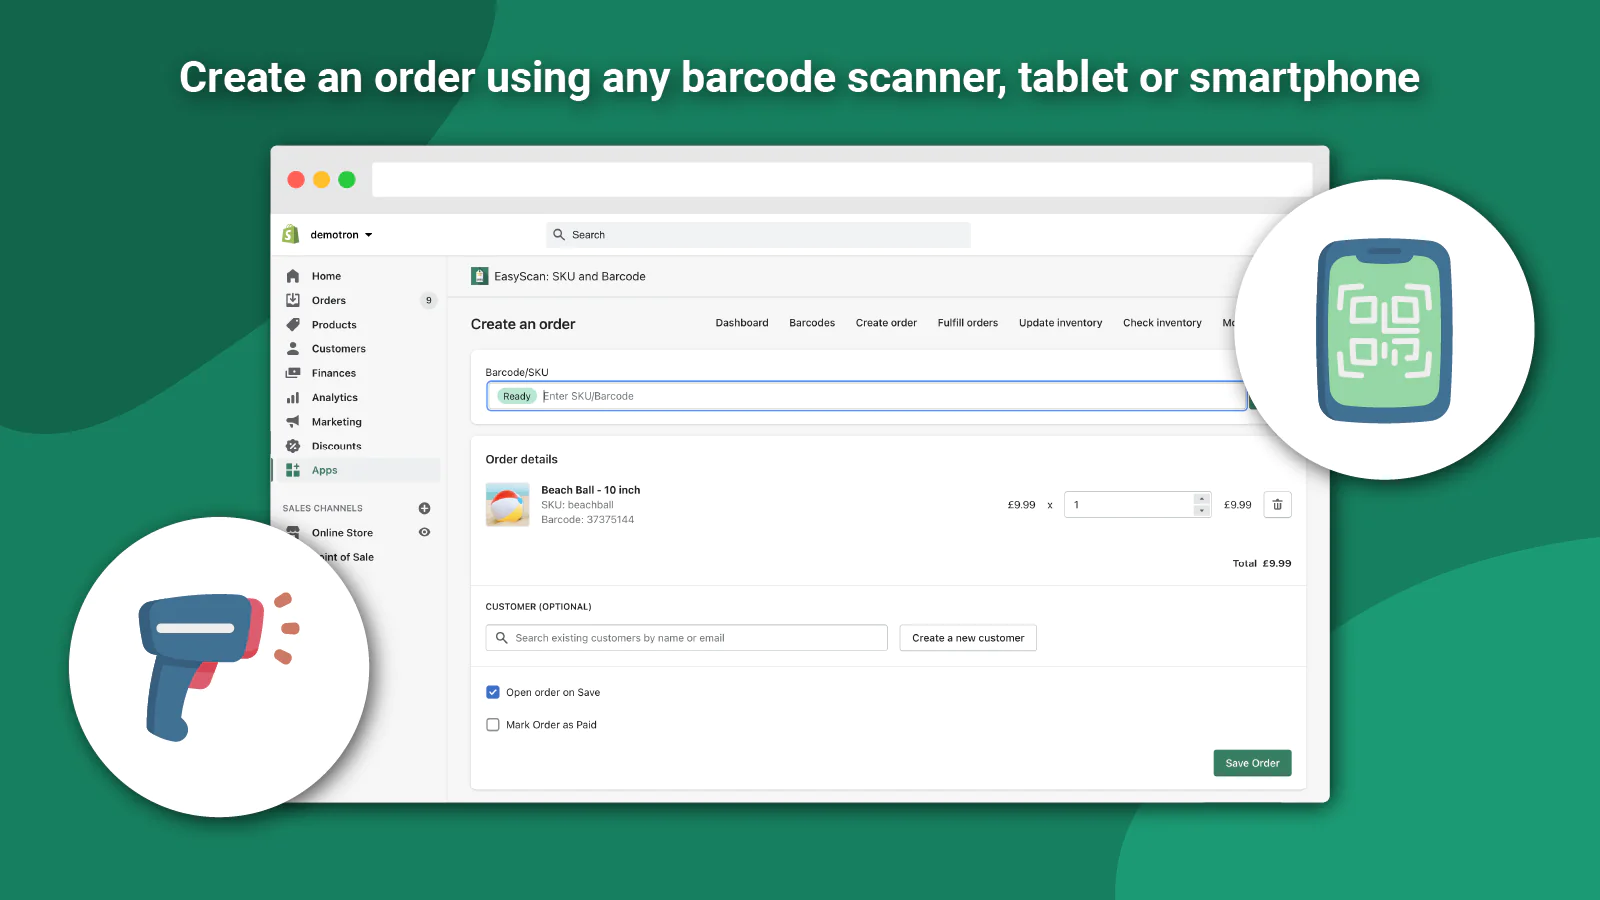 easyscan-sku-and-barcode-create-an-order